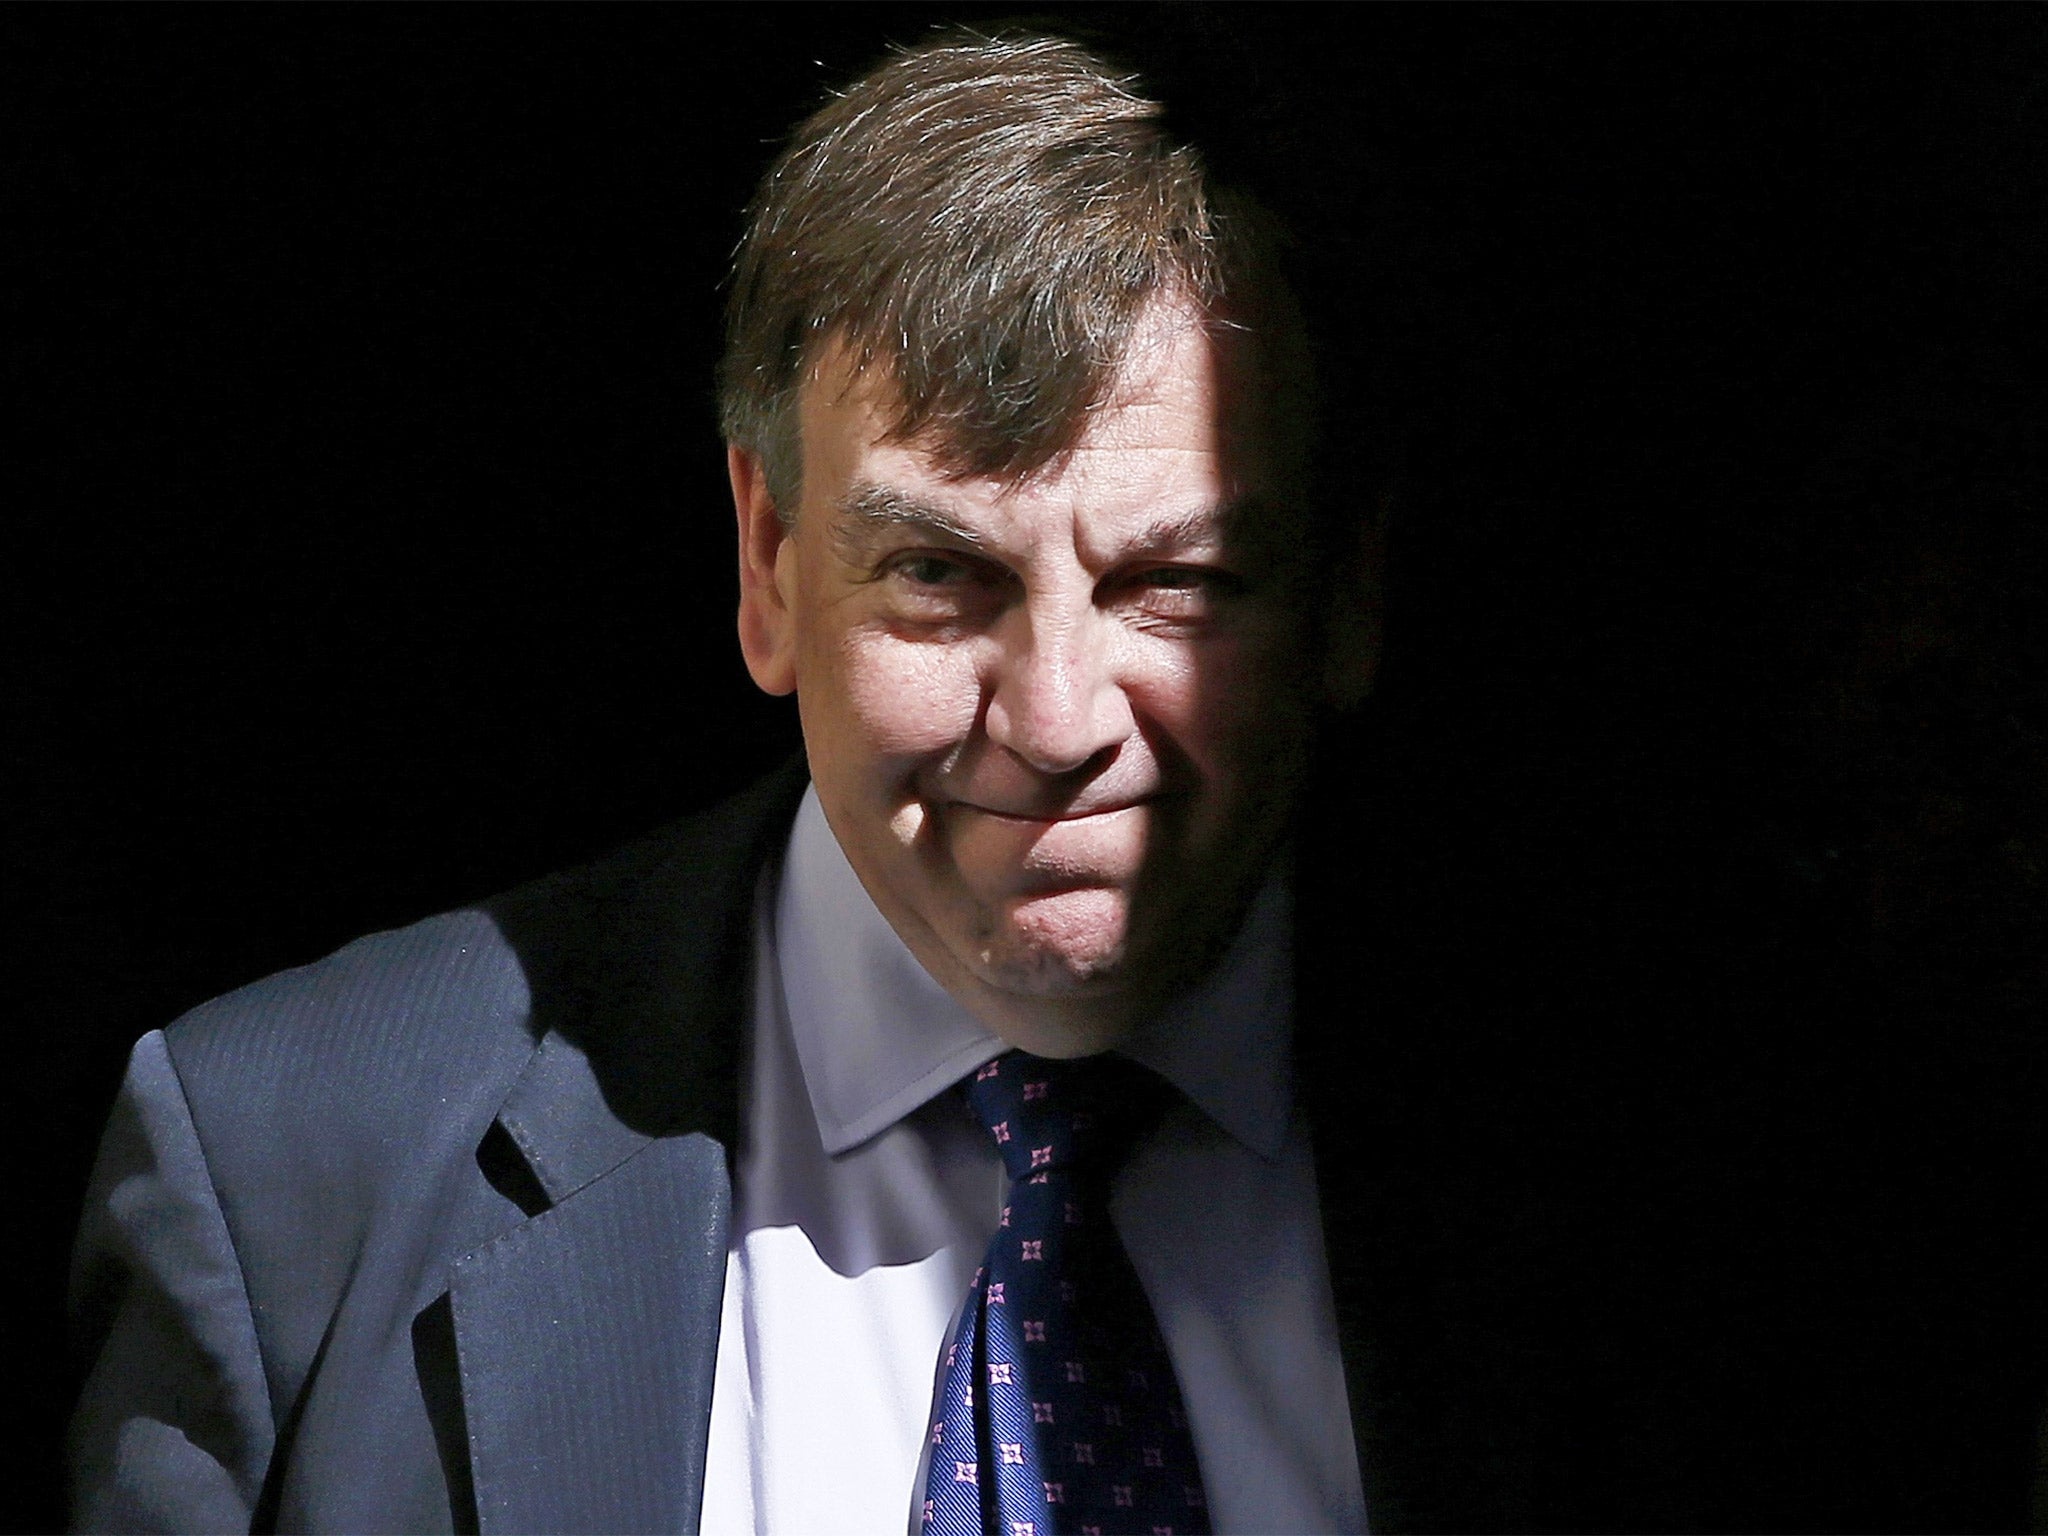 Culture Secretary, John Whittingdale, is expected to publish a White Paper that will form the basis of BBC’s next Royal Charter that will govern the corporation for the next eleven years